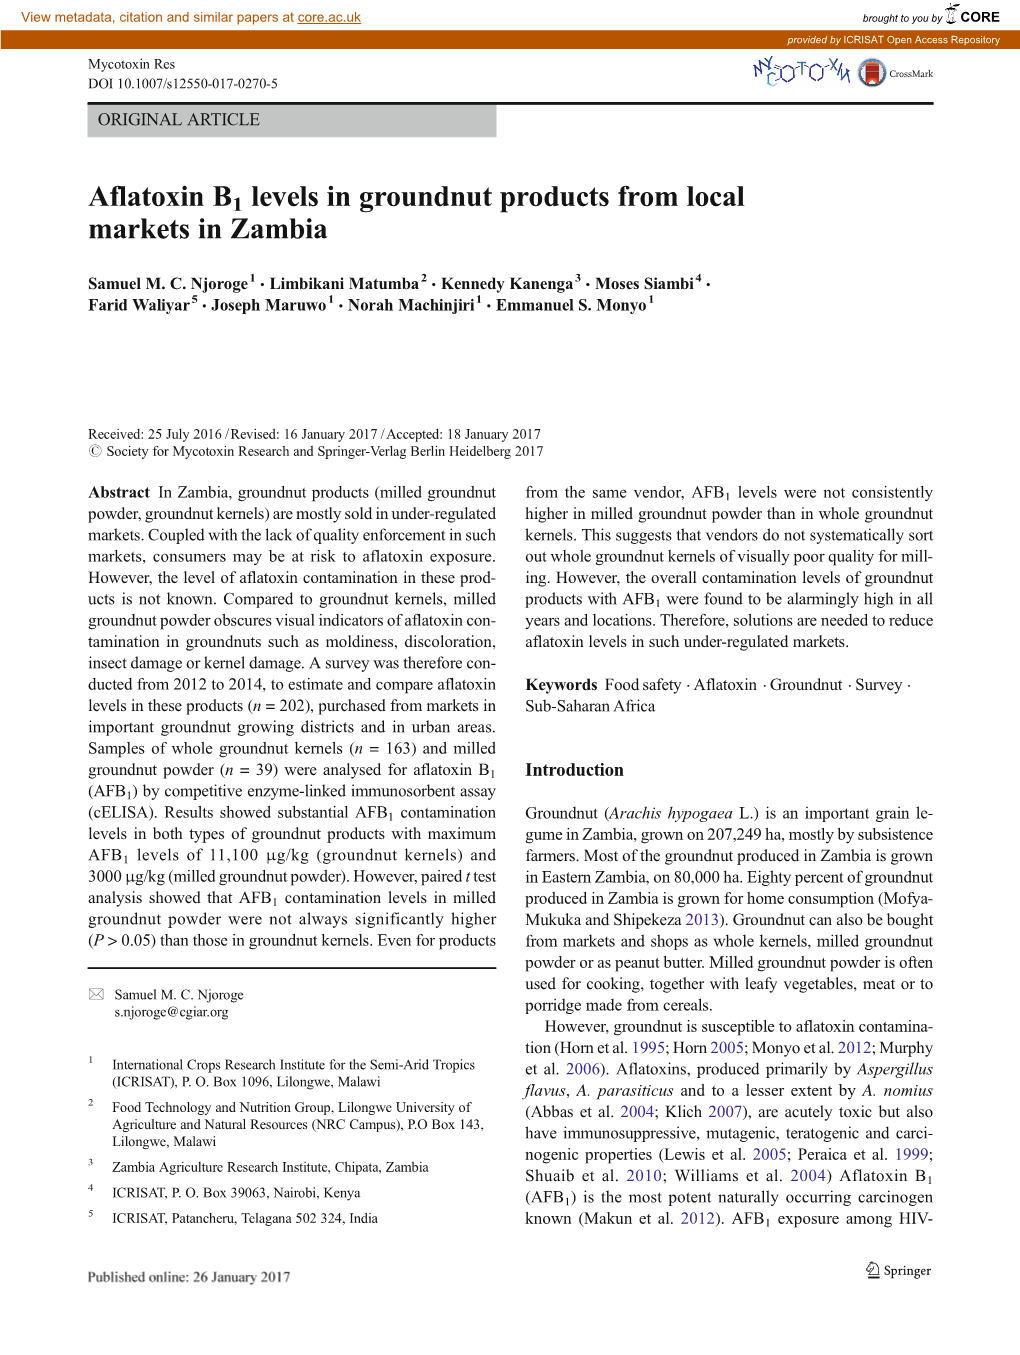 Aflatoxin B1 Levels in Groundnut Products from Local Markets in Zambia